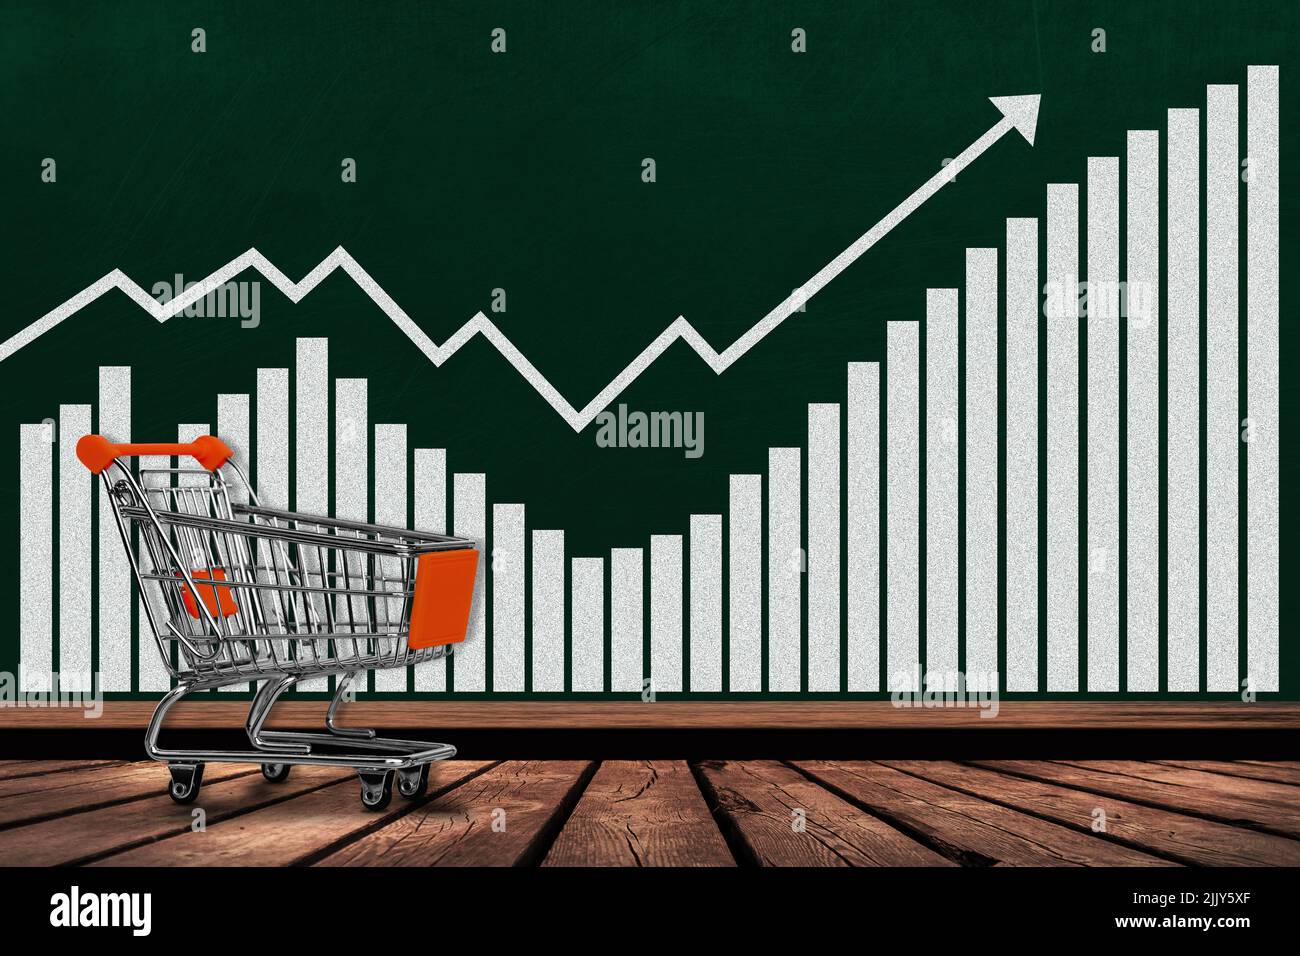 Shopping cart and growth chart on chalkboard with copy space. Concept of increases in sales, revenues, profits, economy, inflation, business activity. Stock Photo